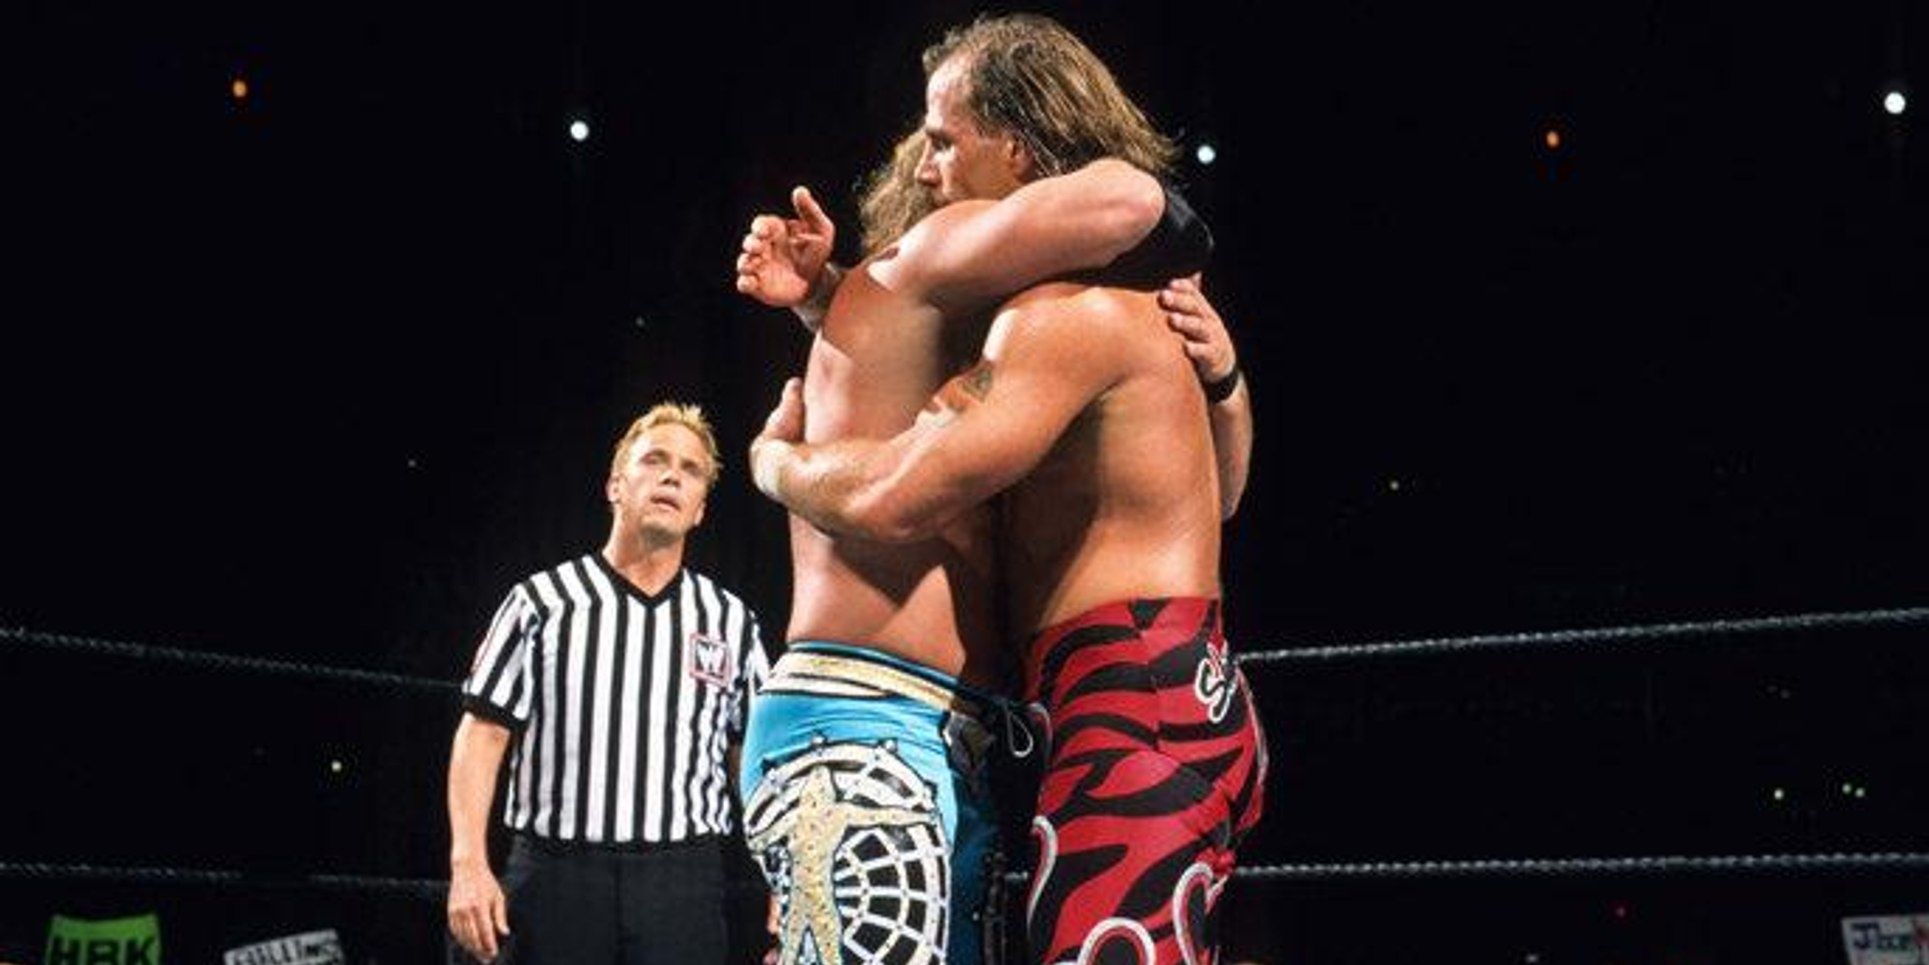 WWE Chris Jericho And Shawn Michaels Hugging In The Ring At WrestleMania 19